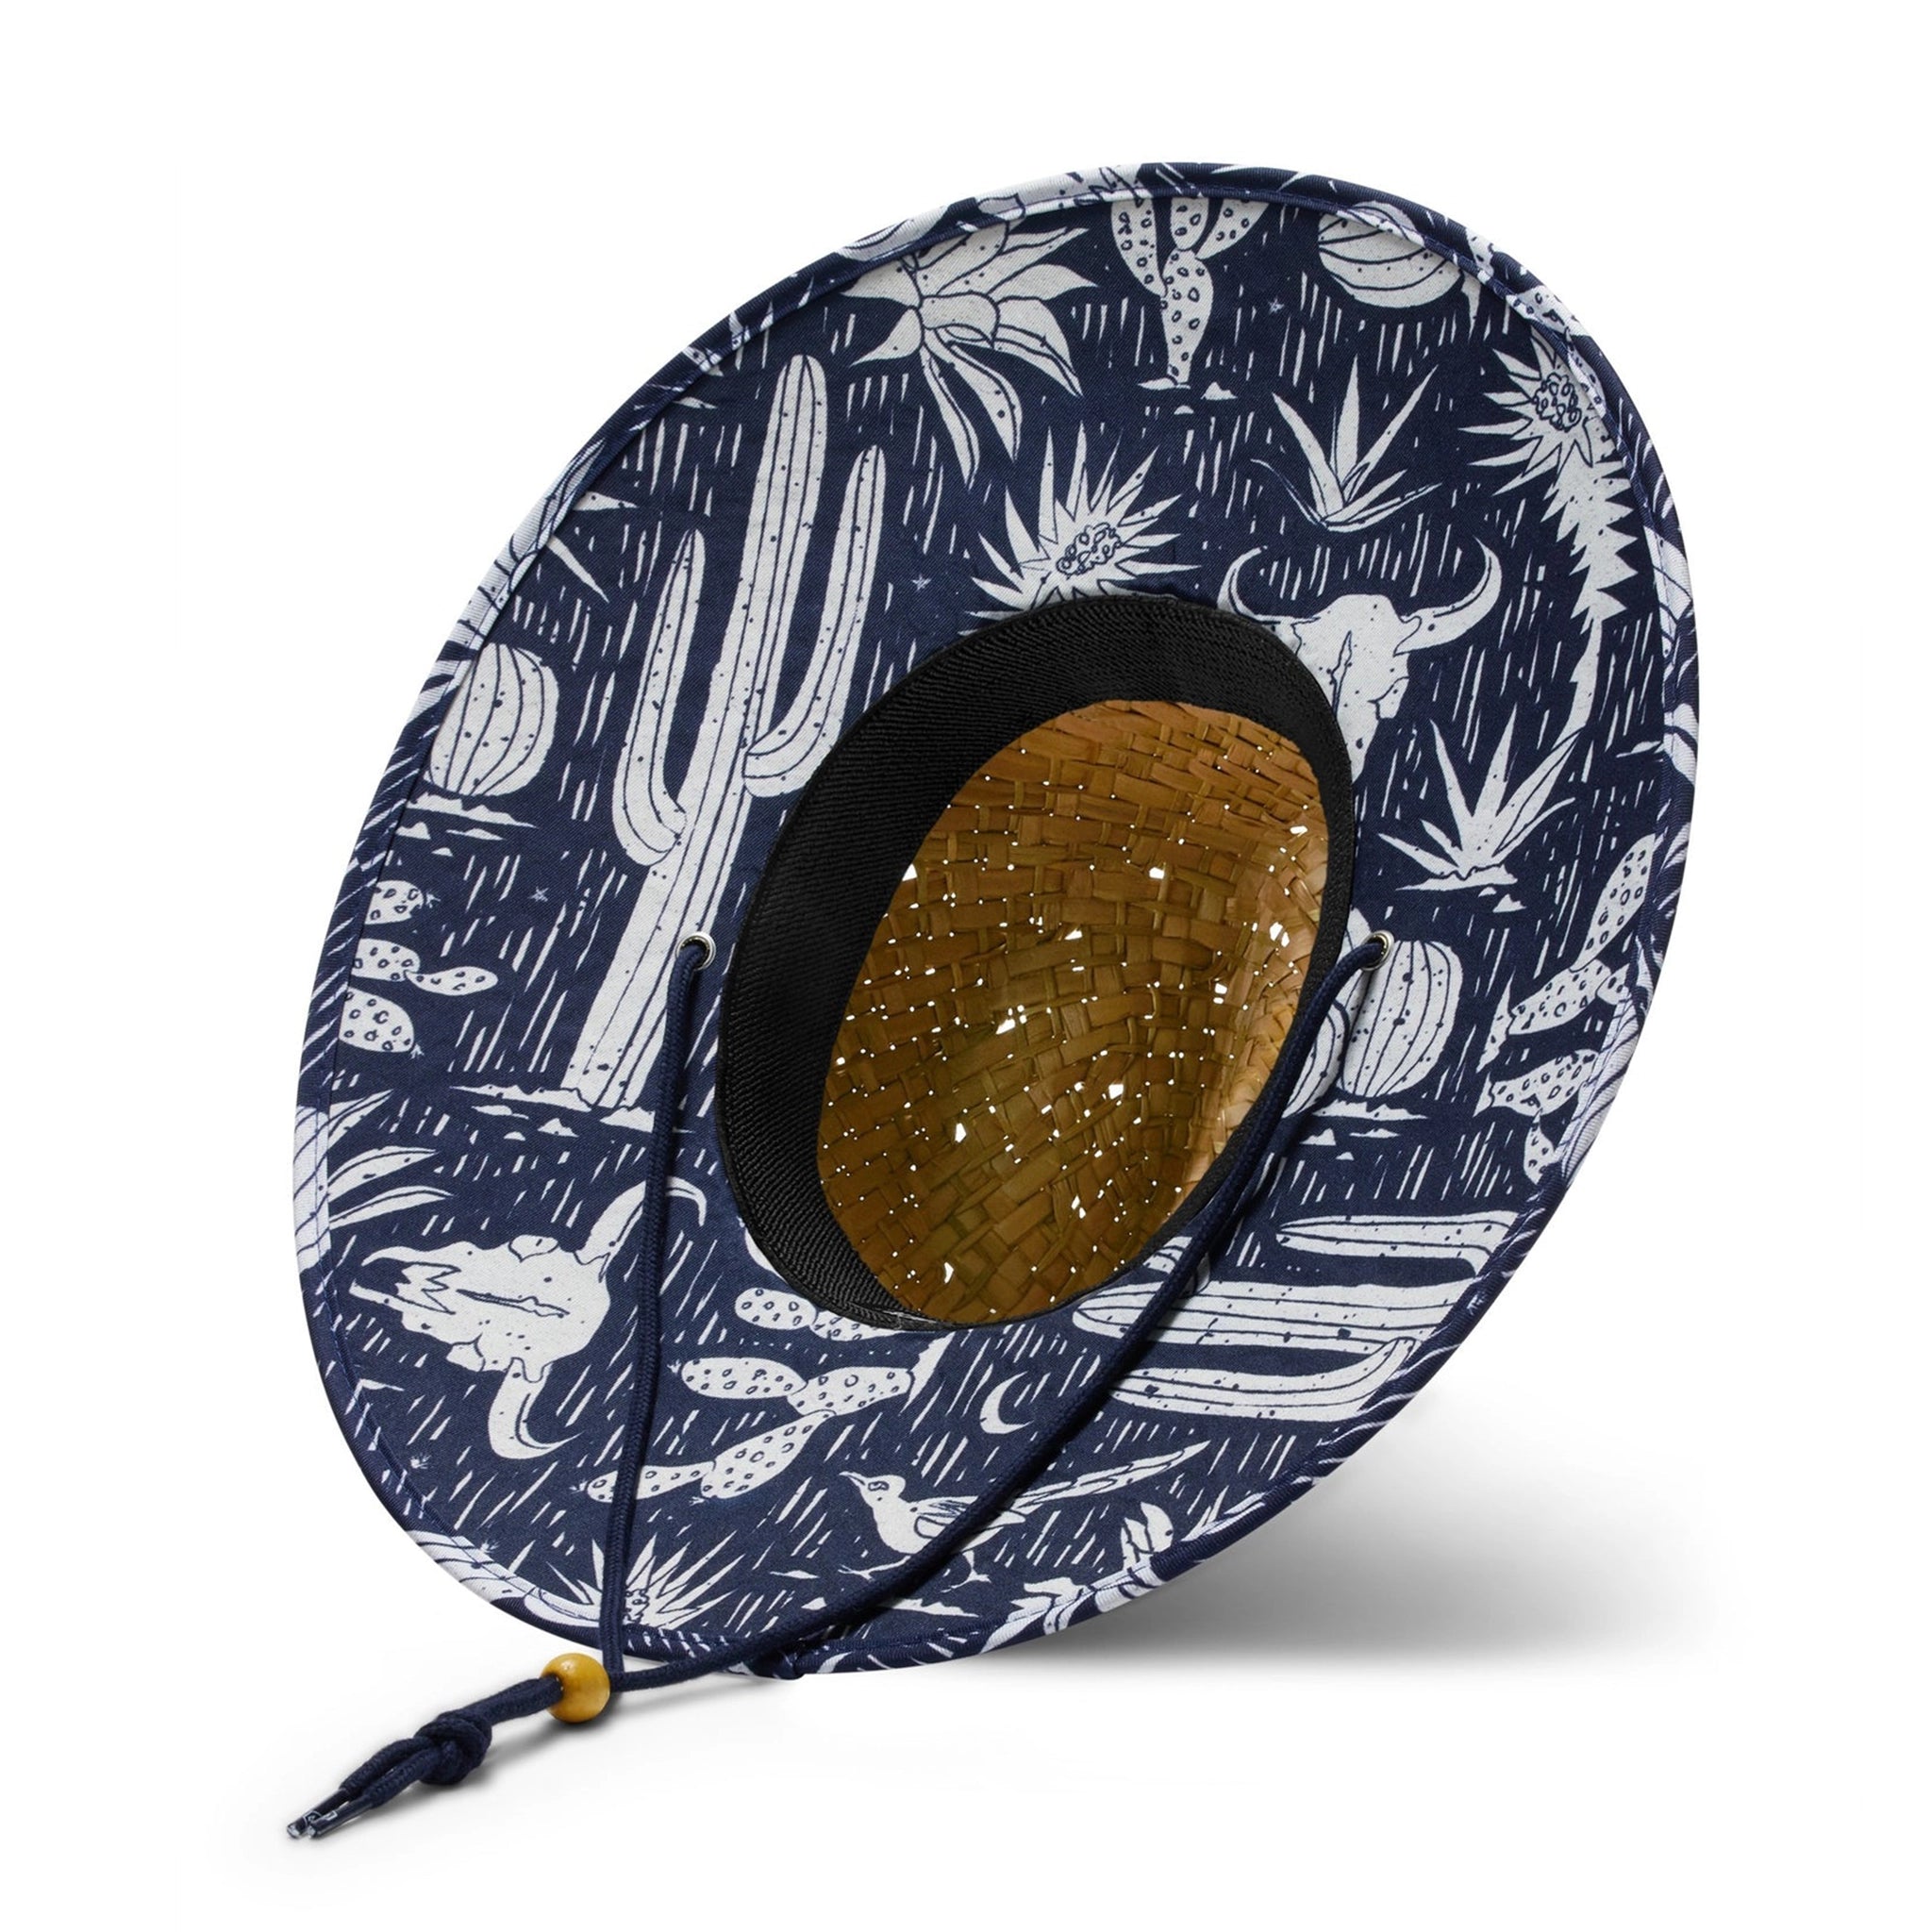 A straw sun hat with a dark blue and white desert design under the brim and a coordinating neck strap.